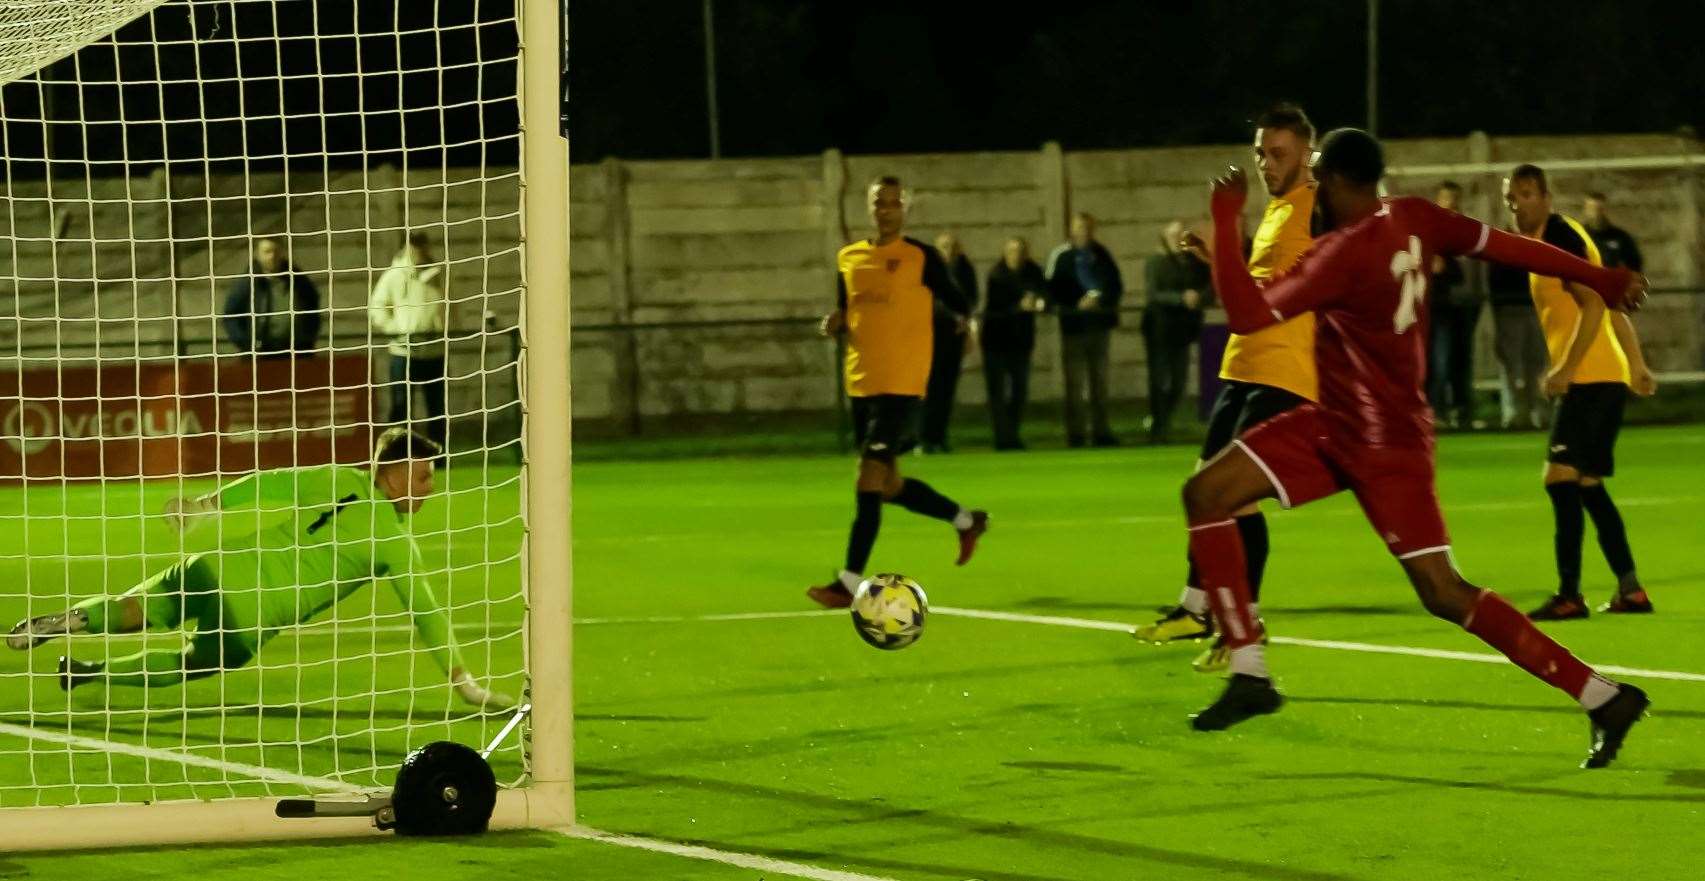 Whitstable’s Emmanuel Oloyede scores on his debut in their 4-2 victory away to Kennington on Tuesday night. Picture: Les Biggs